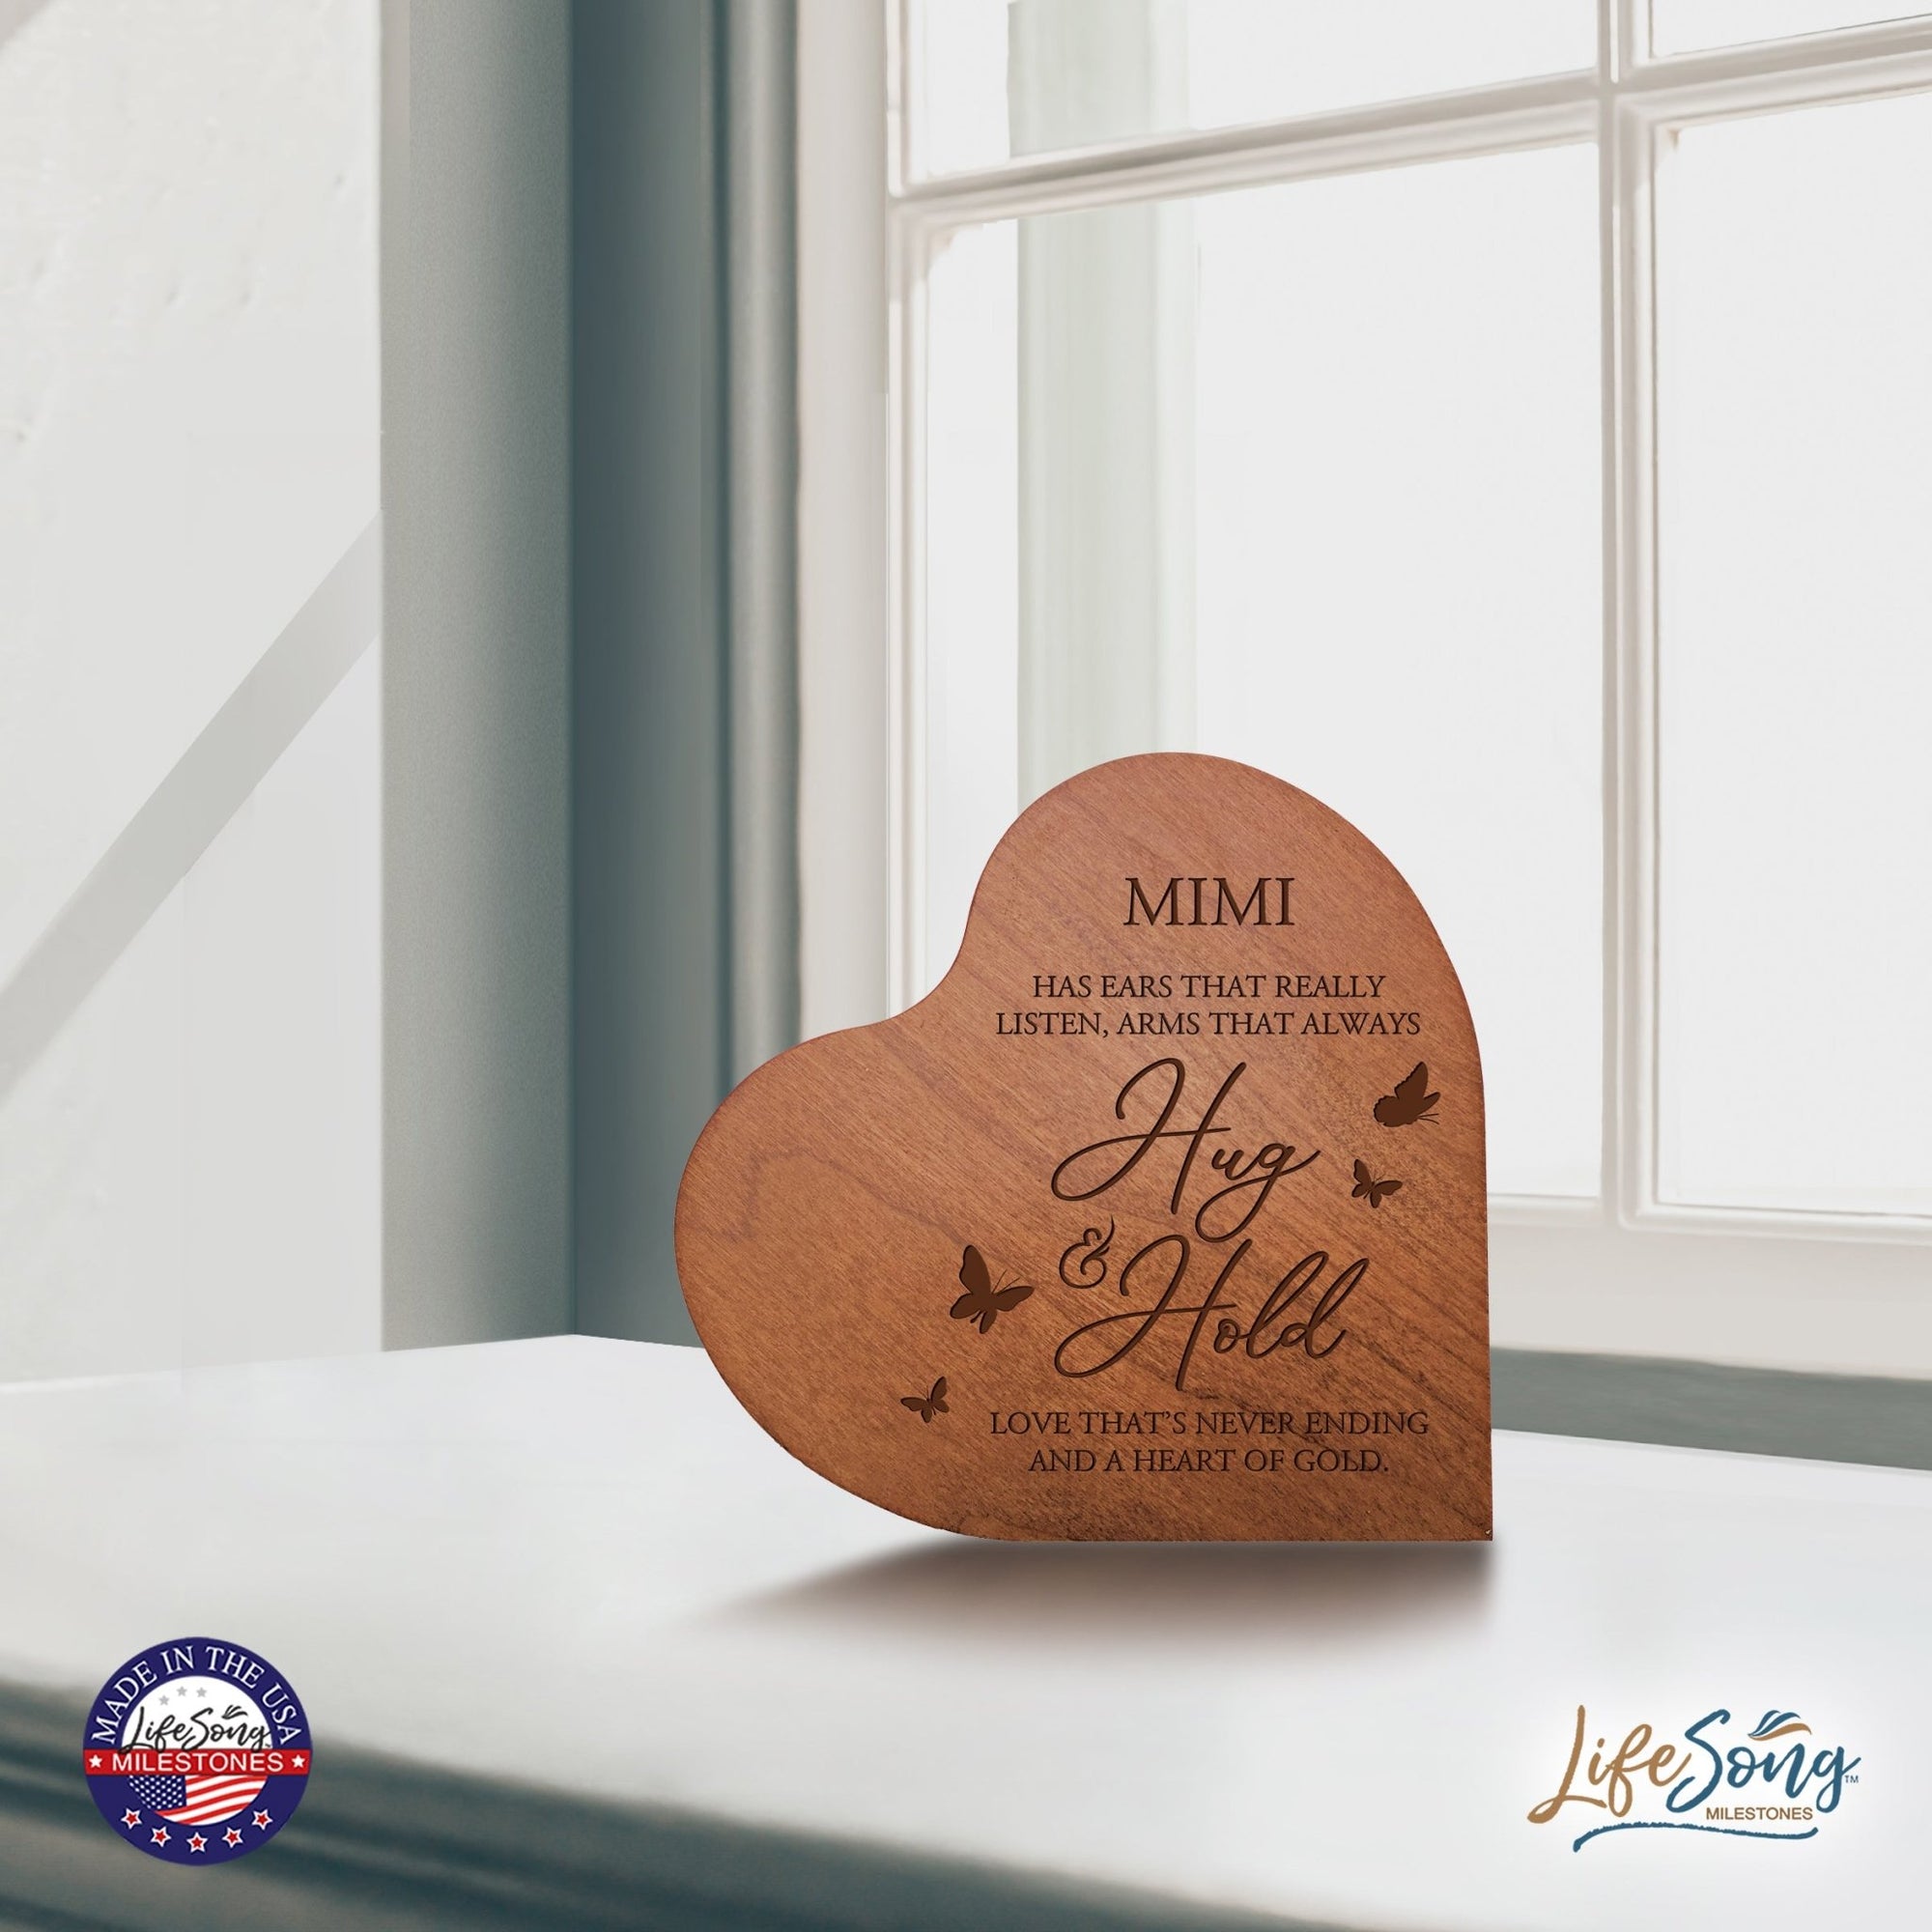 Modern Mimi’s Love Solid Wood Heart Decoration With Inspirational Verse Keepsake Gift 5x5.25 - Mimi Has Ears That Really = Hug & Hold - LifeSong Milestones